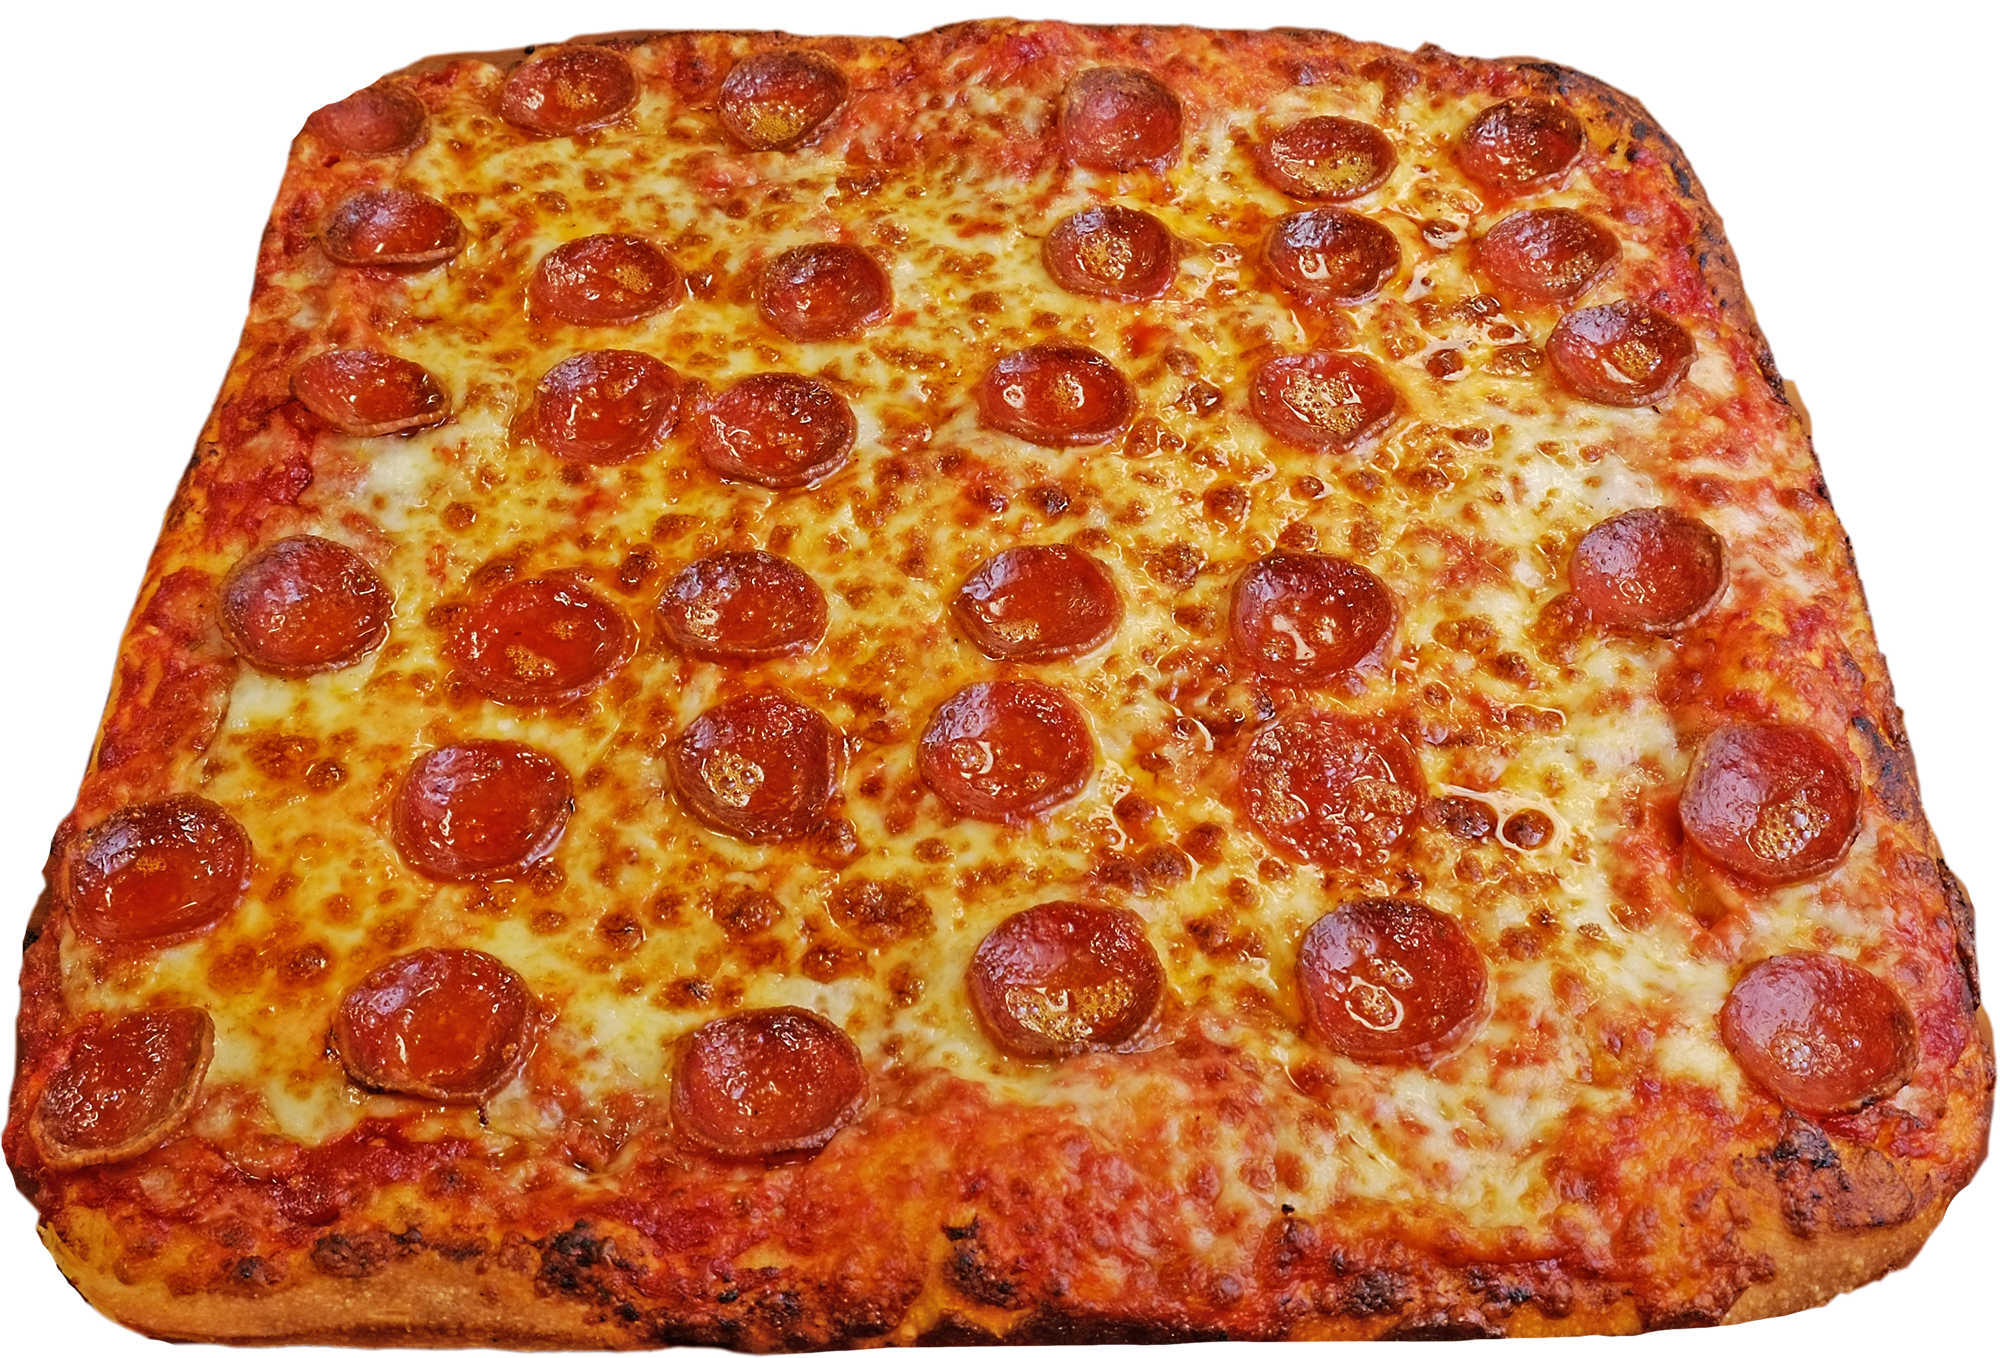 Full Pepperoni and Cheese Pizza